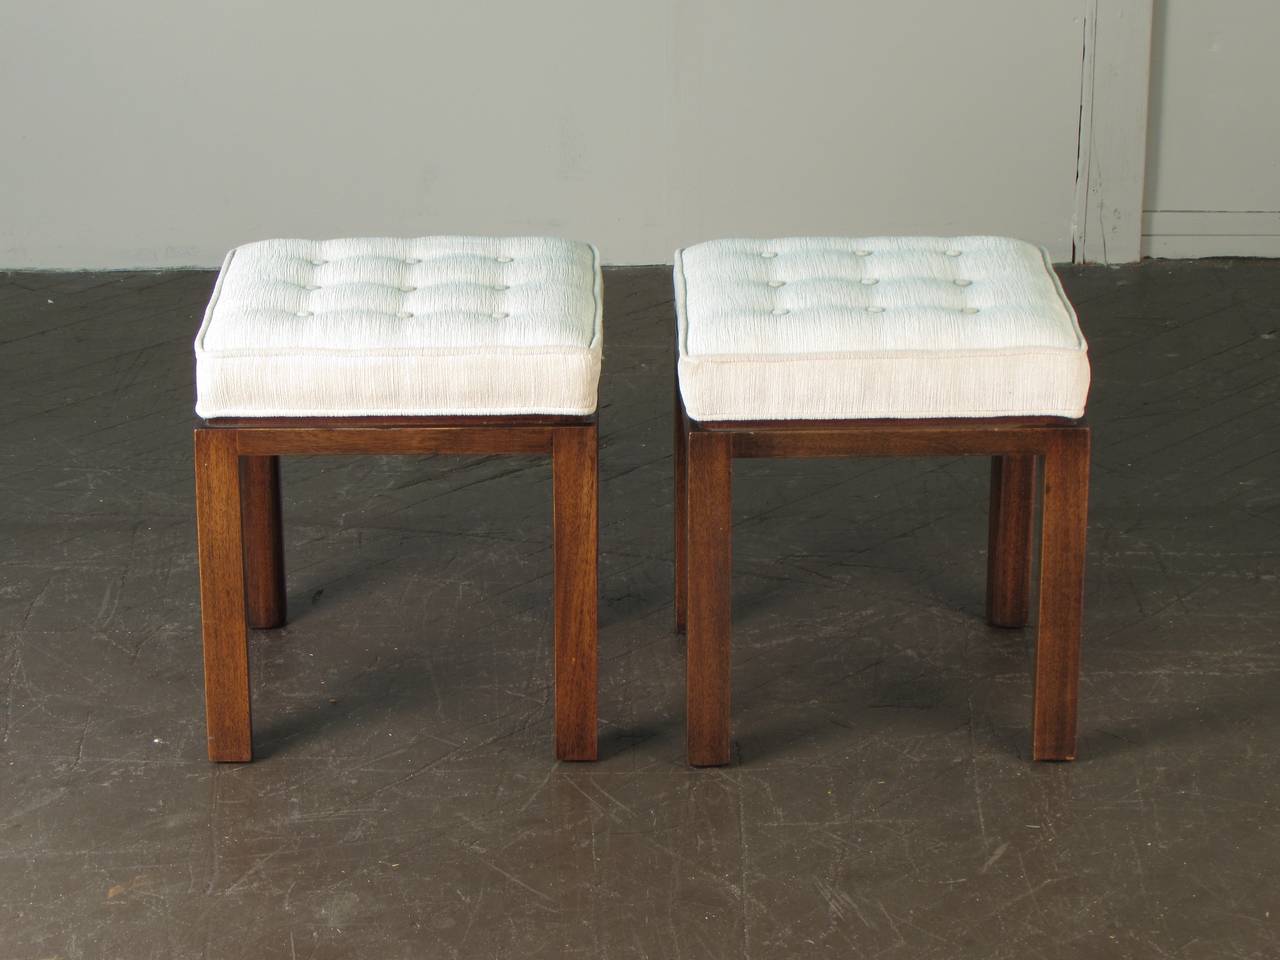 Mid-Century Modern Stately Pair of Signed Upholstered Stools or Benches by Harvey Probber, 1965